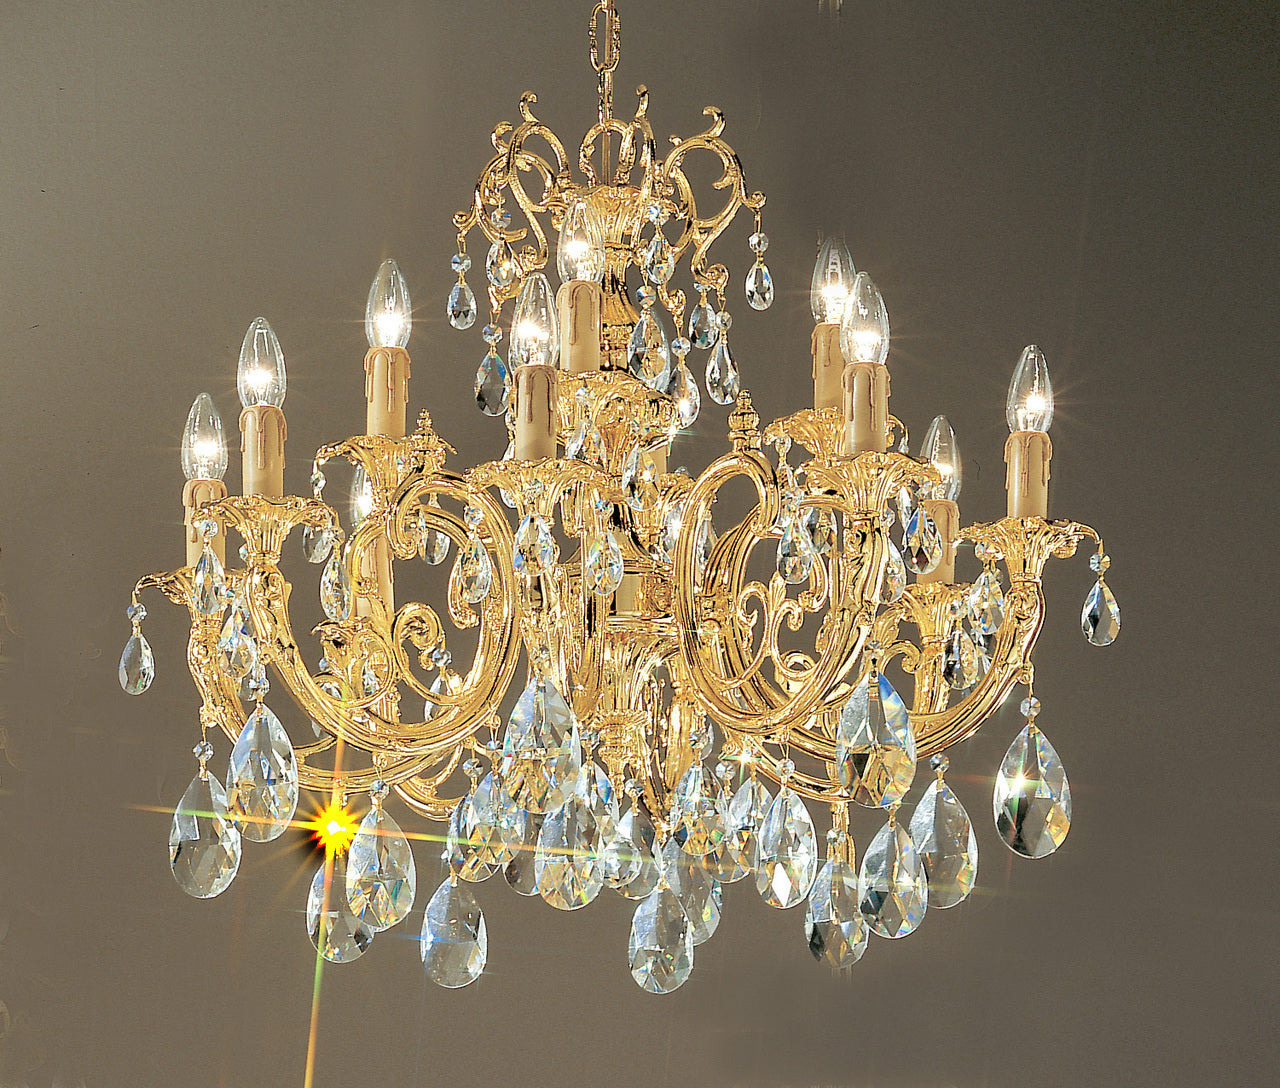 Classic Lighting 5712 G Princeton Cast Brass Chandelier in 24k Gold (Imported from Spain)